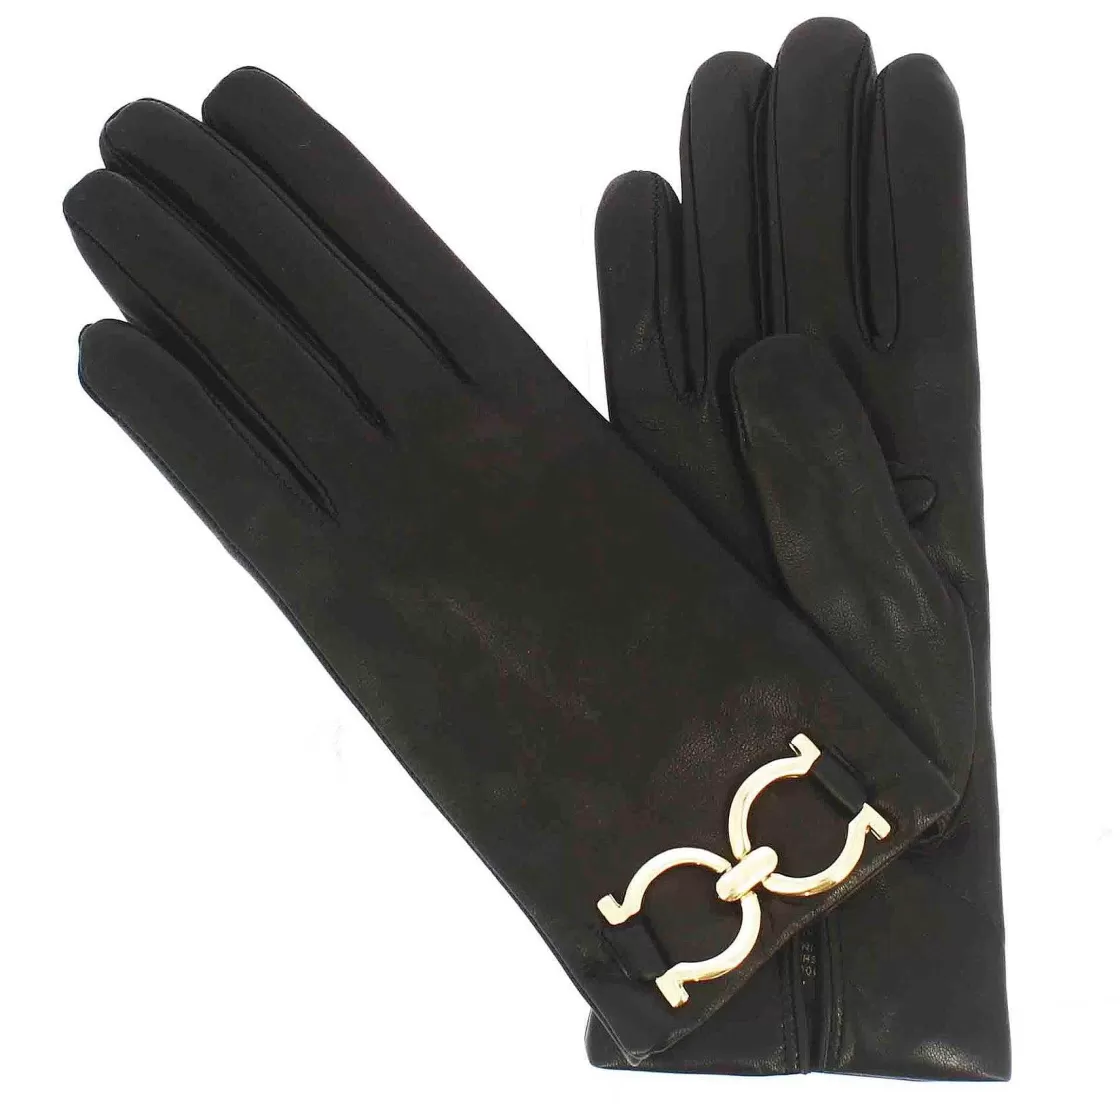 Leonardo Women'S Glove In Black Leather With Gold Horsebit And Cashmere Lining Clearance